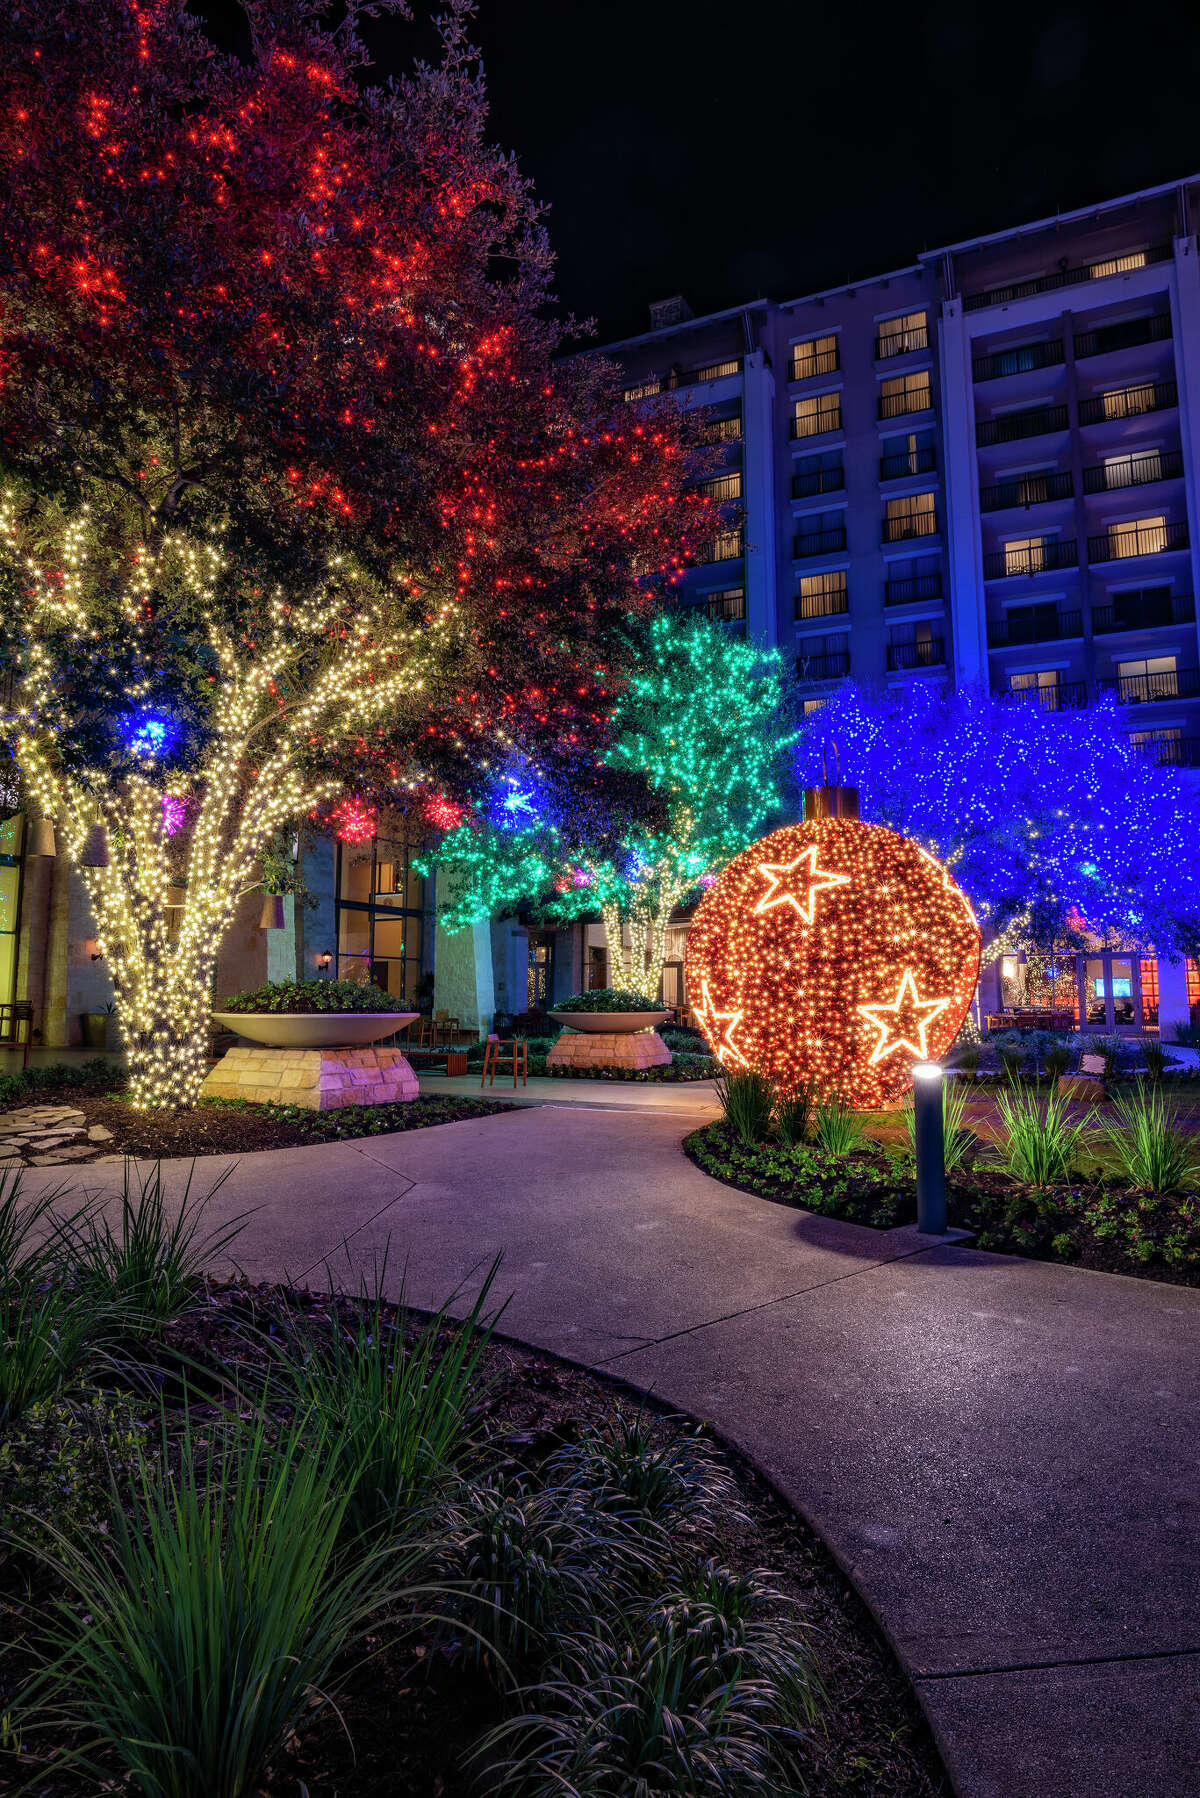 The JW Marriott San Antonio Hill Country Resort & Spa transforms into a Christmas wonderland for the holidays, with everything from gingerbread house decorating to live reindeer to the pop-up Arctic Lodge experience.